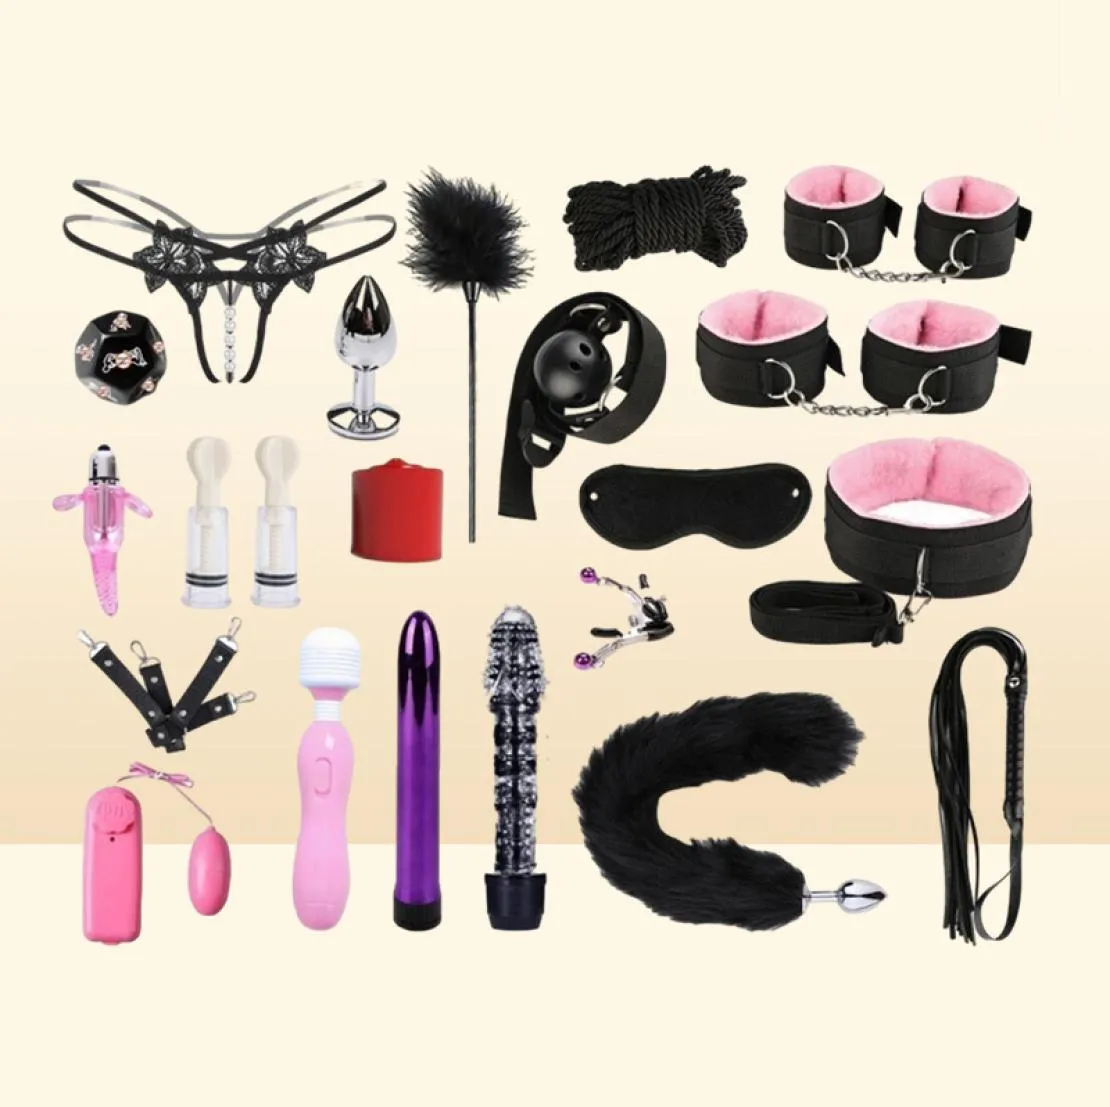 Set Sm Torture Tool Adult Fun Products Flirting with Female Slaves on the Bed Alter Binding Props Handcuffs and Whips YM096892456